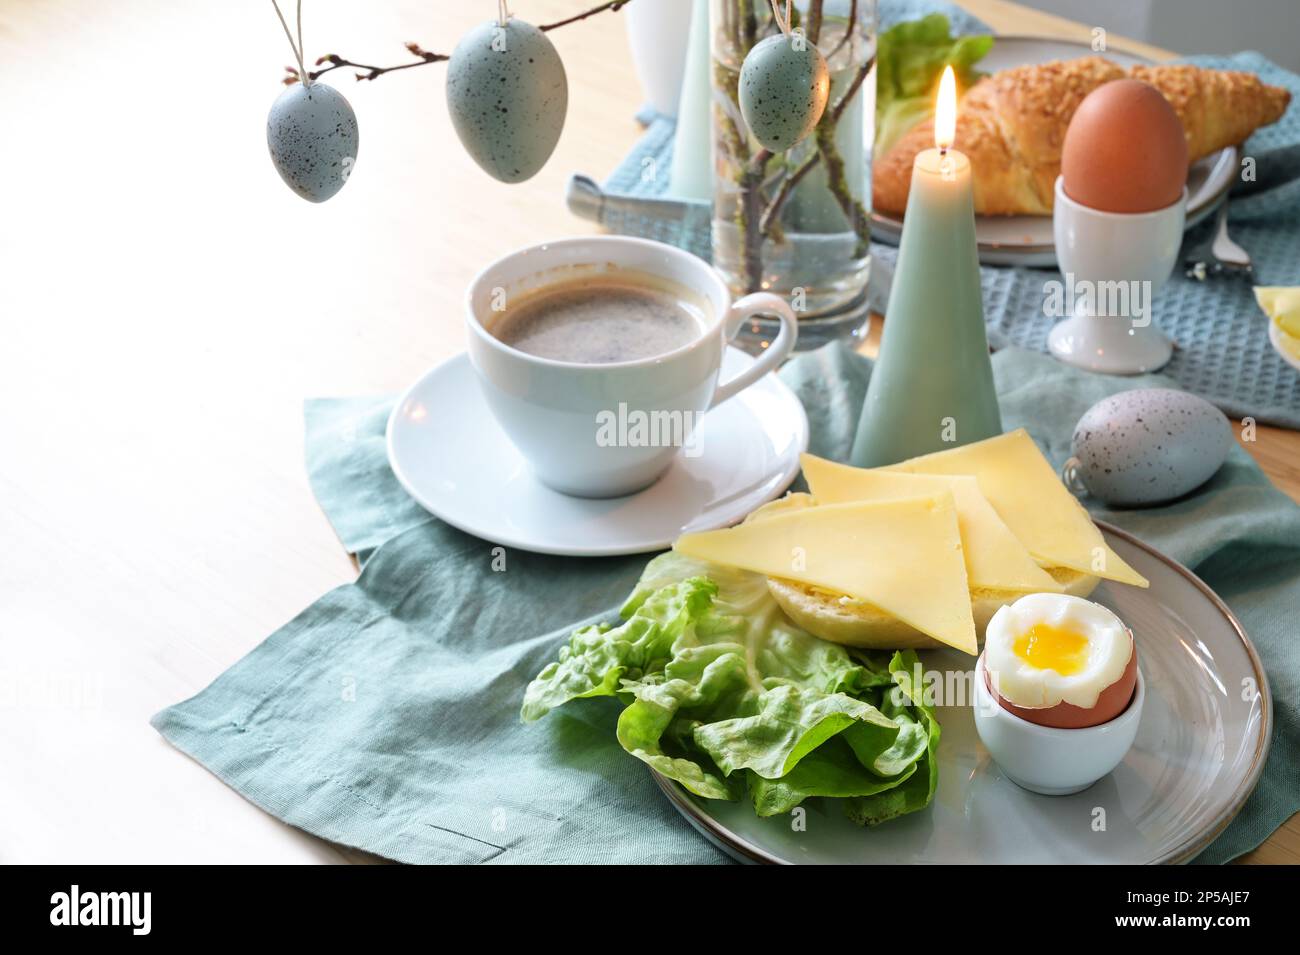 Breakfast table setting with bread roll, cheese, boiled egg and coffee on a pastel turquoise napkin, hanging Easter eggs and candle as decoration, cop Stock Photo